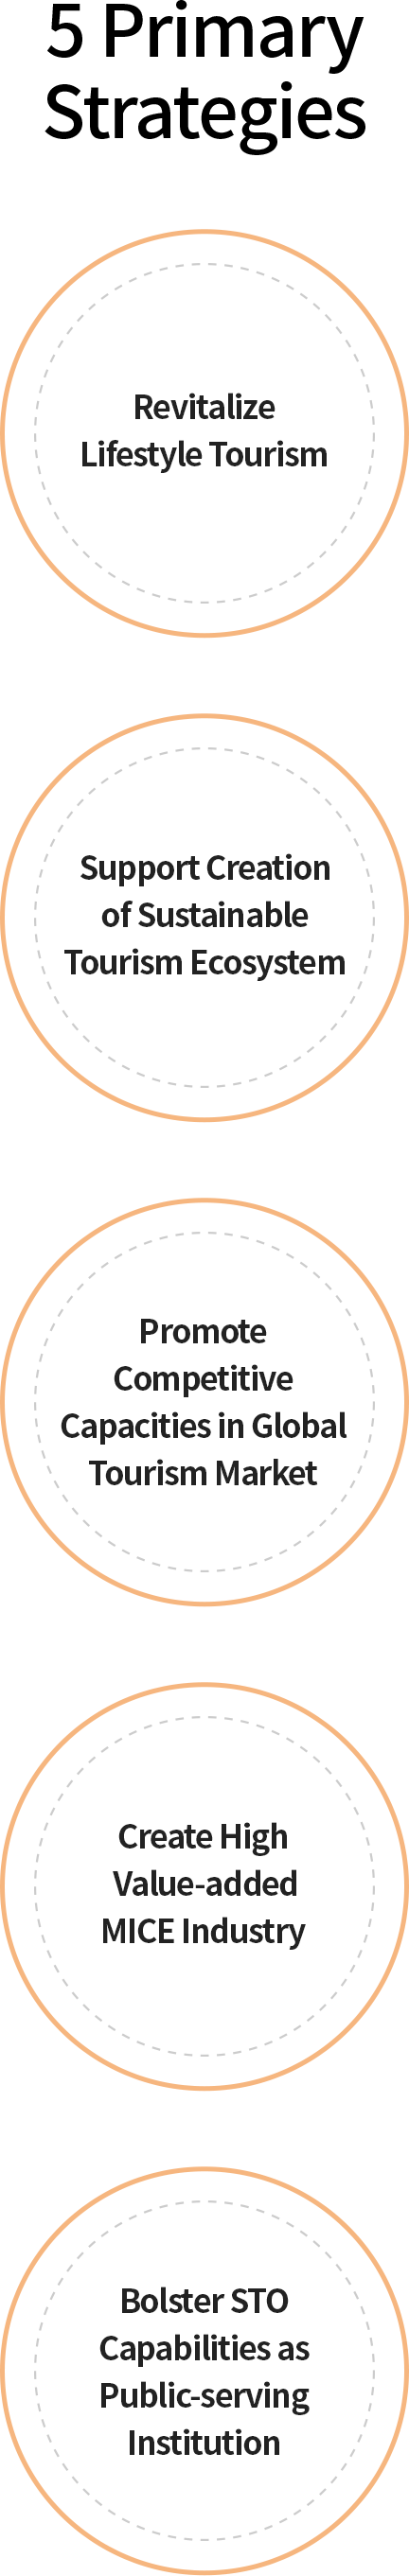 5 Primary Strategies:Revitalize Lifestyle Tourism, Support Creation of Sustainable Tourism Ecosystem, Promote Competitive Capacities in Global Tourism Market, Create High Value-added MICE Industry, Bolster STO Capabilities as Public-serving Institution